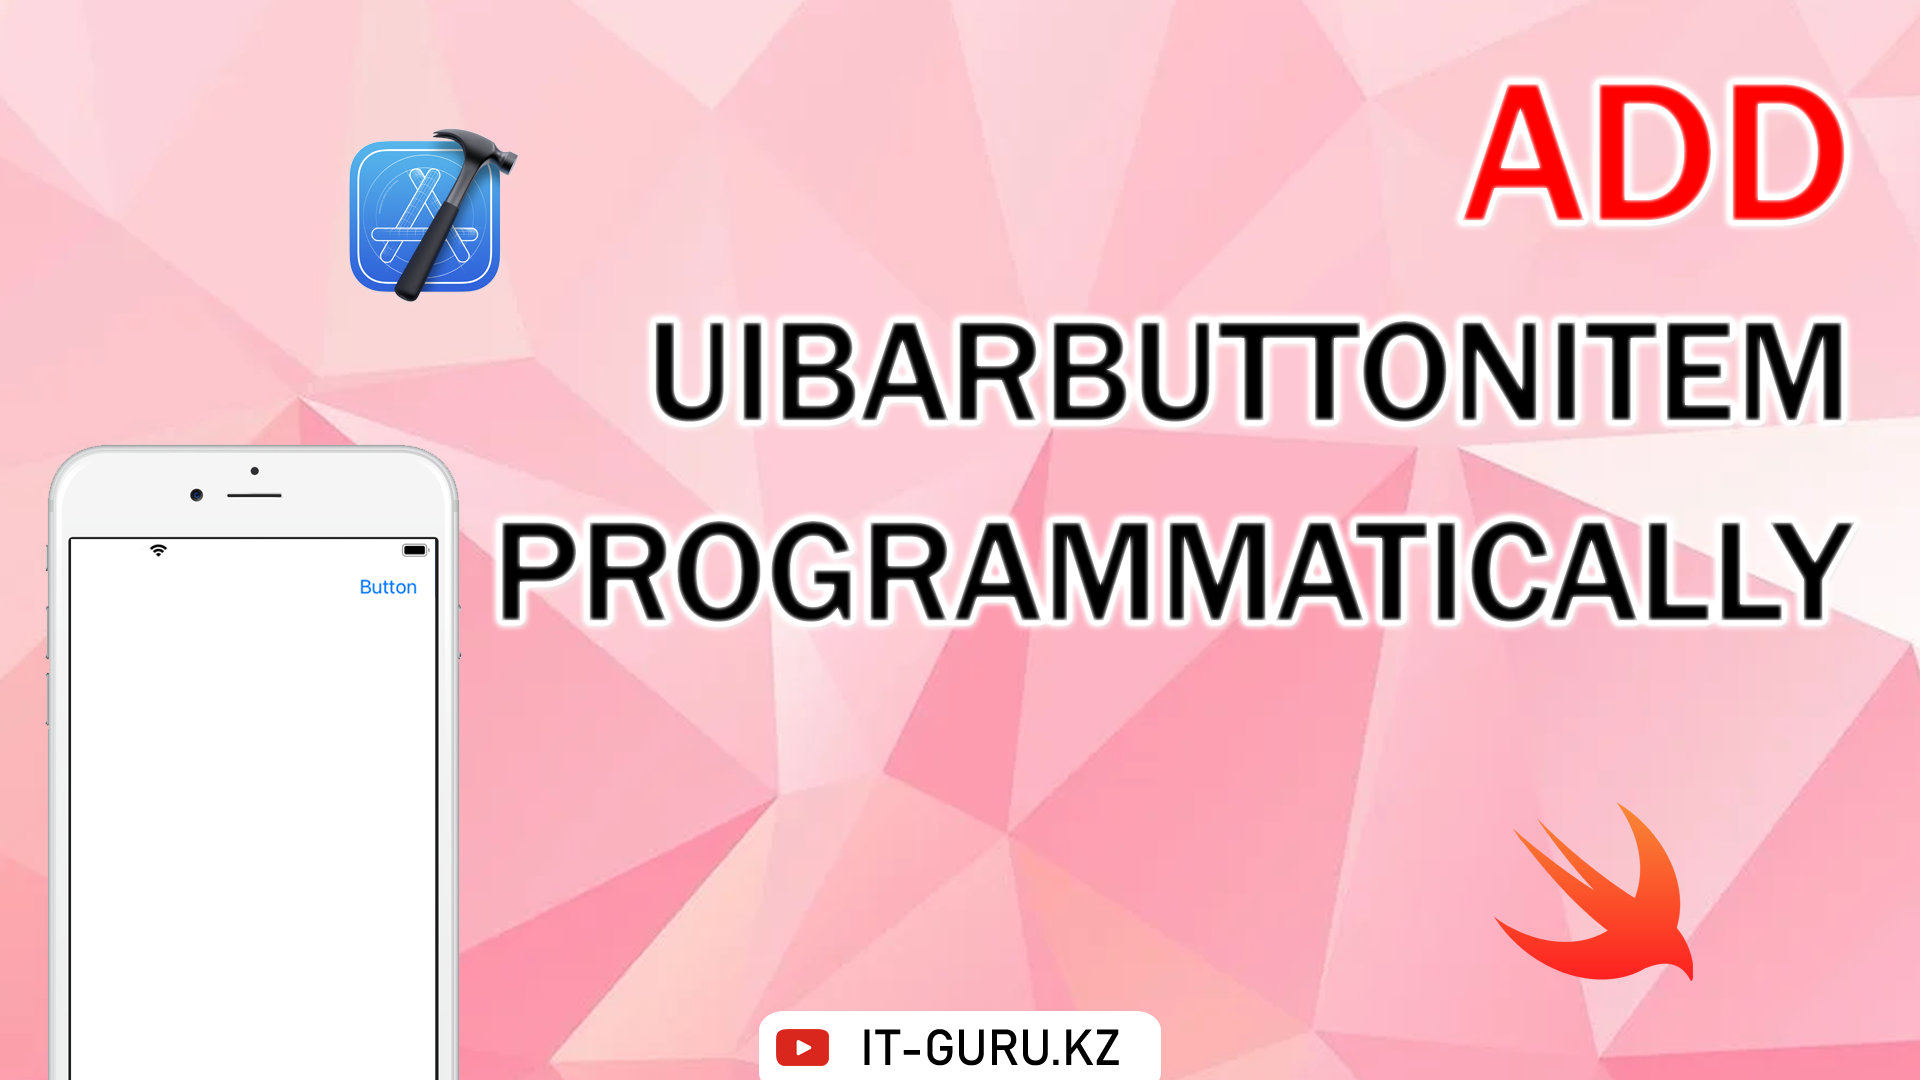 How to add UIBarButtonItem programmatically